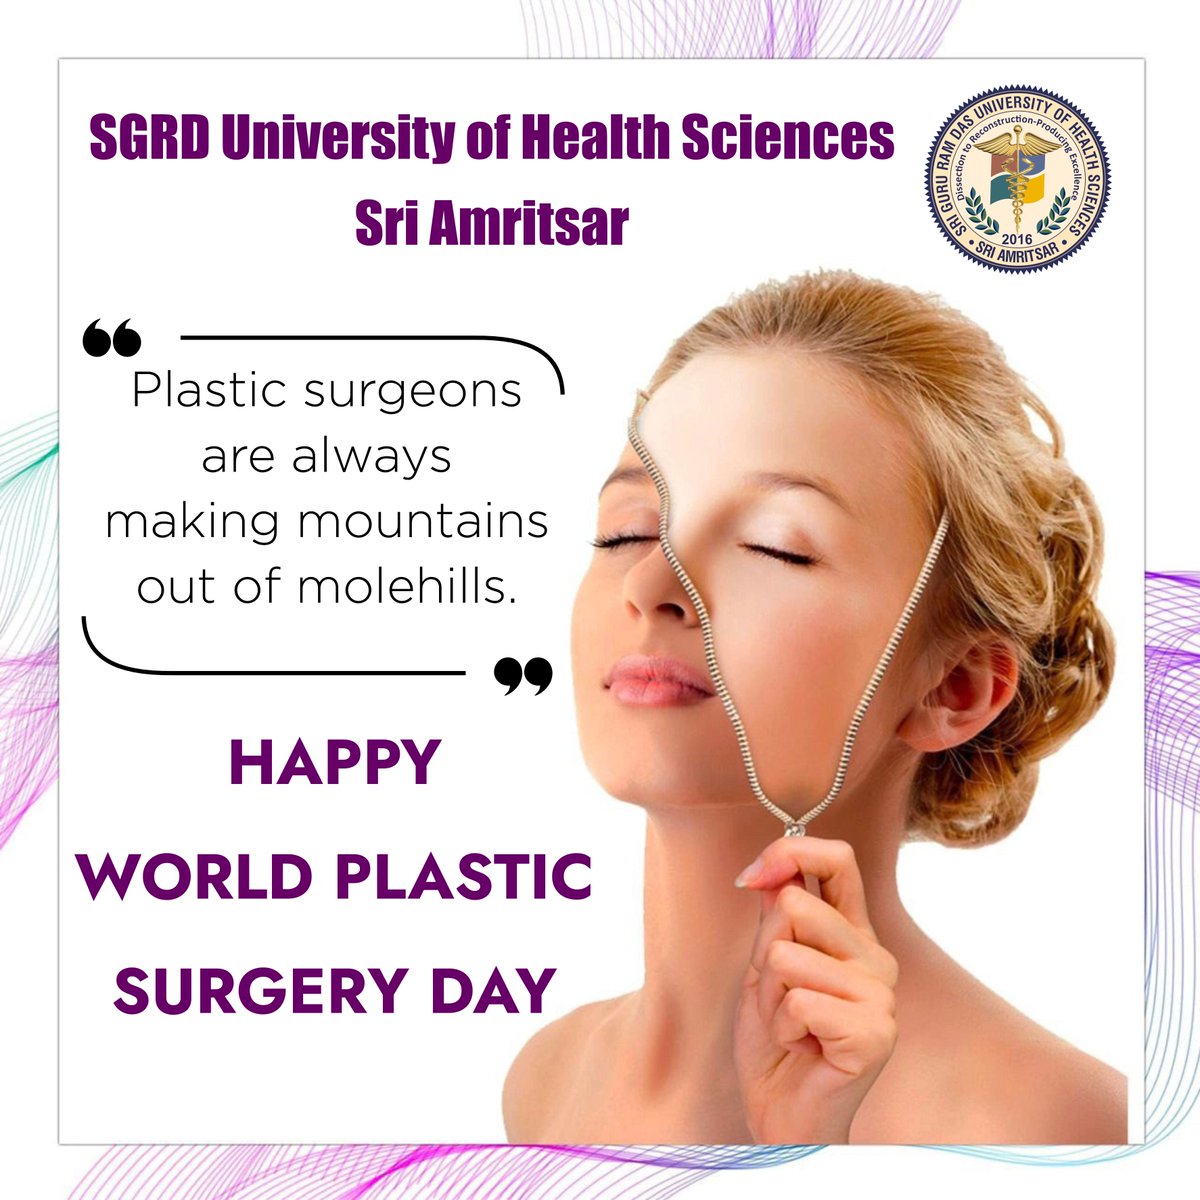 Embrace your uniqueness, enhance your confidence.  
On #worldplasticsurgeryday, celebrate the transformative power of plastic surgery in restoring lives and renewing self-esteem. 

#plasticsurgery #cosmeticsurgery #plasticsurgeon #cosmeticsurgeon